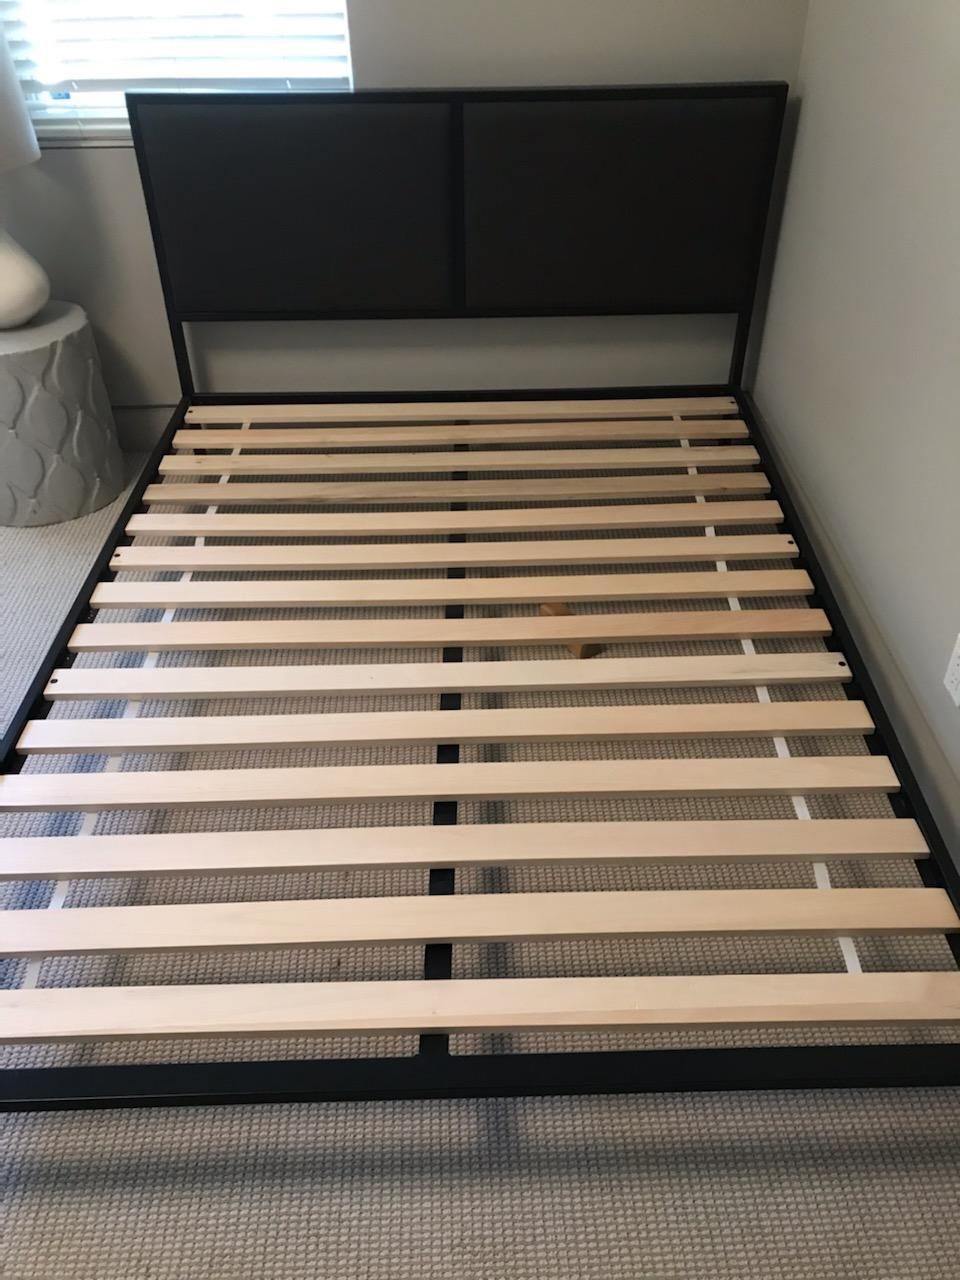 Queen Sized Bed Frame And Mattress